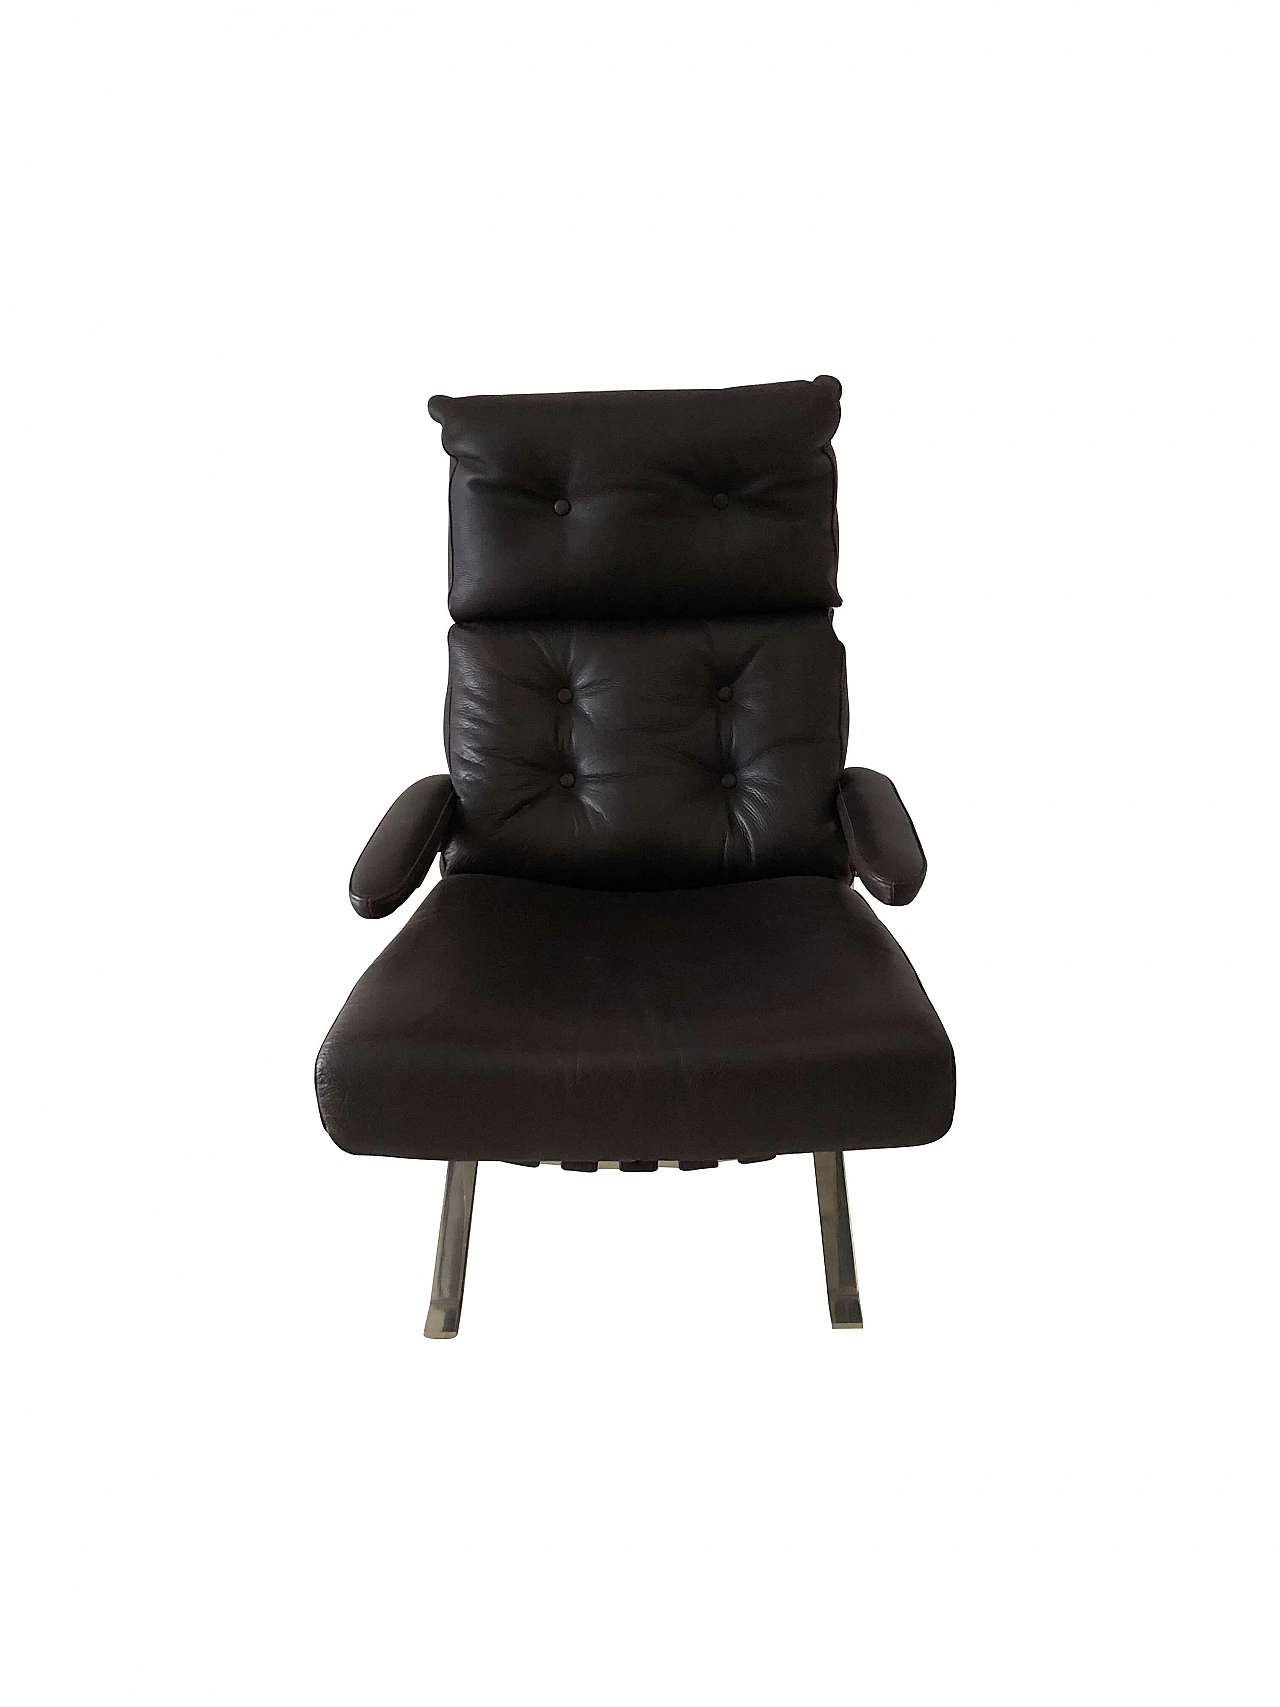 Black leather and steel tilting armchair, early 2000s 1284401